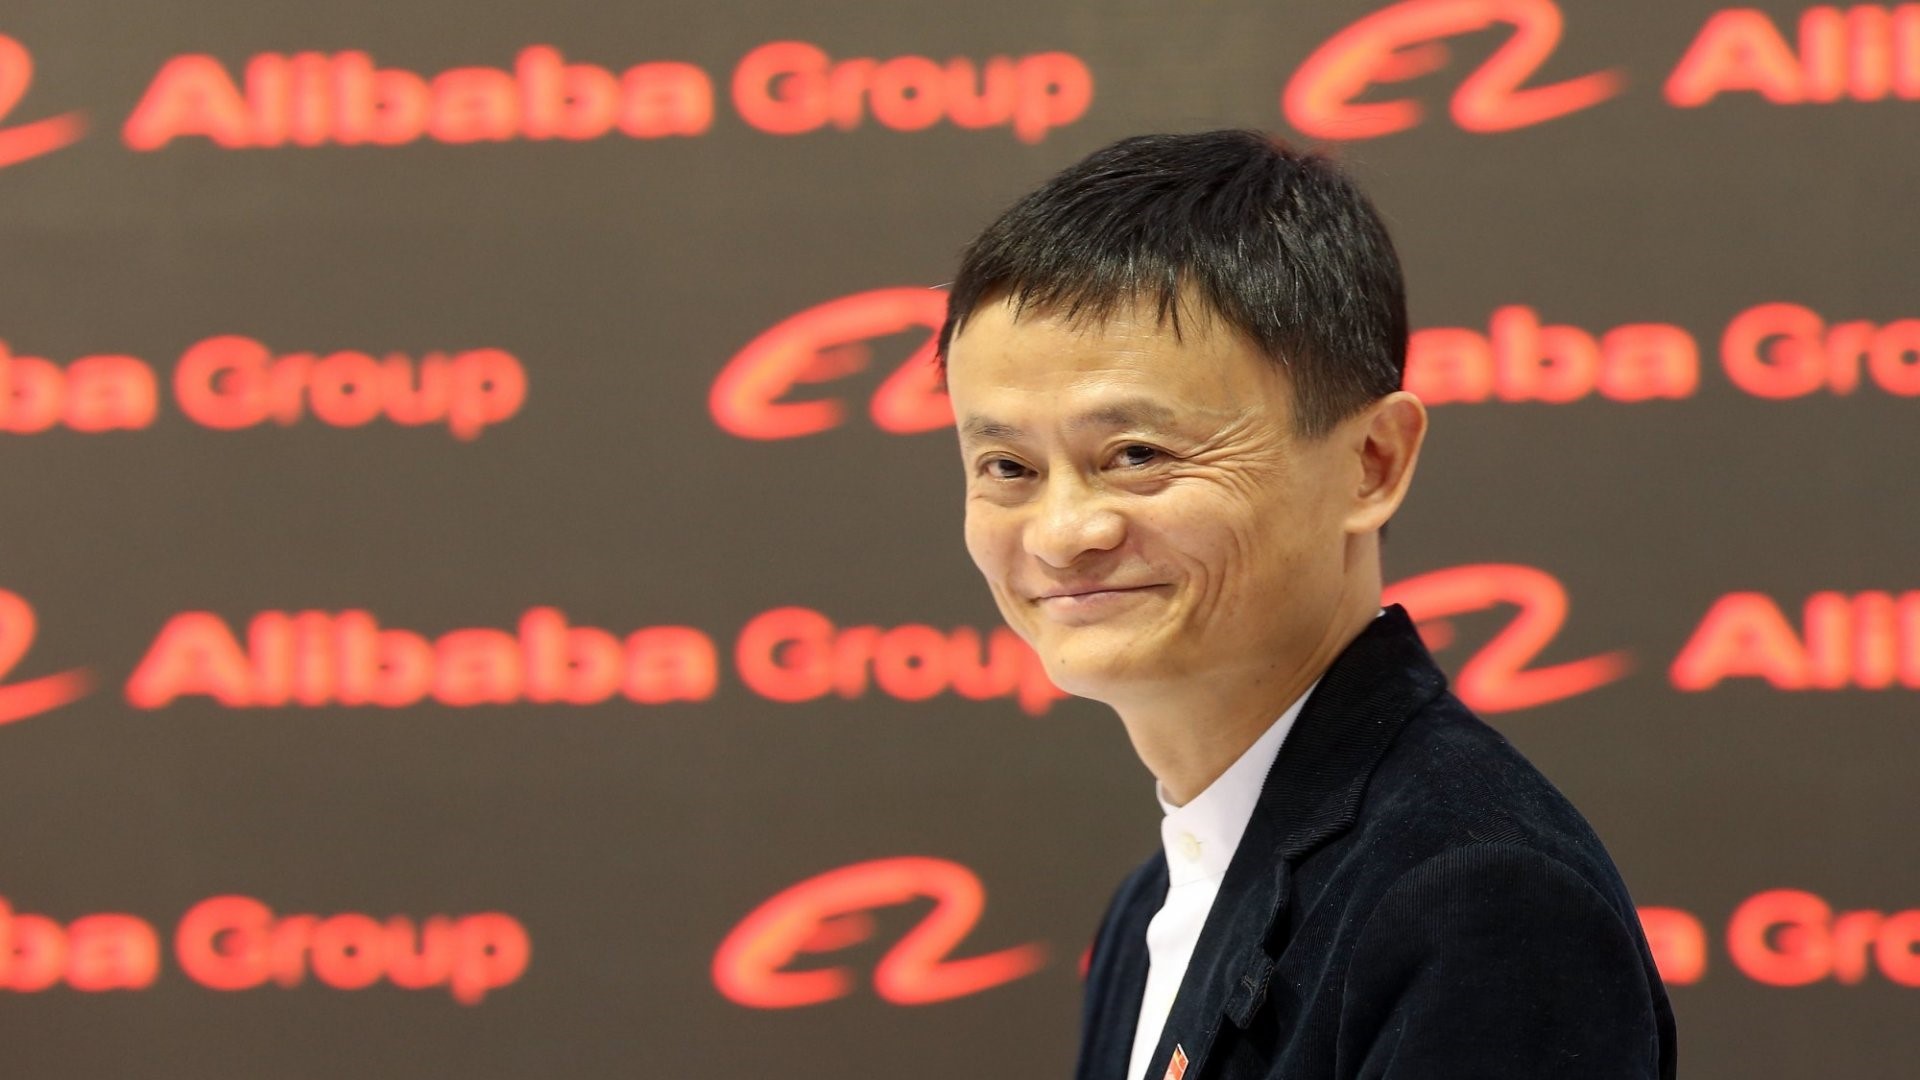 Who is the founder of Alibaba?